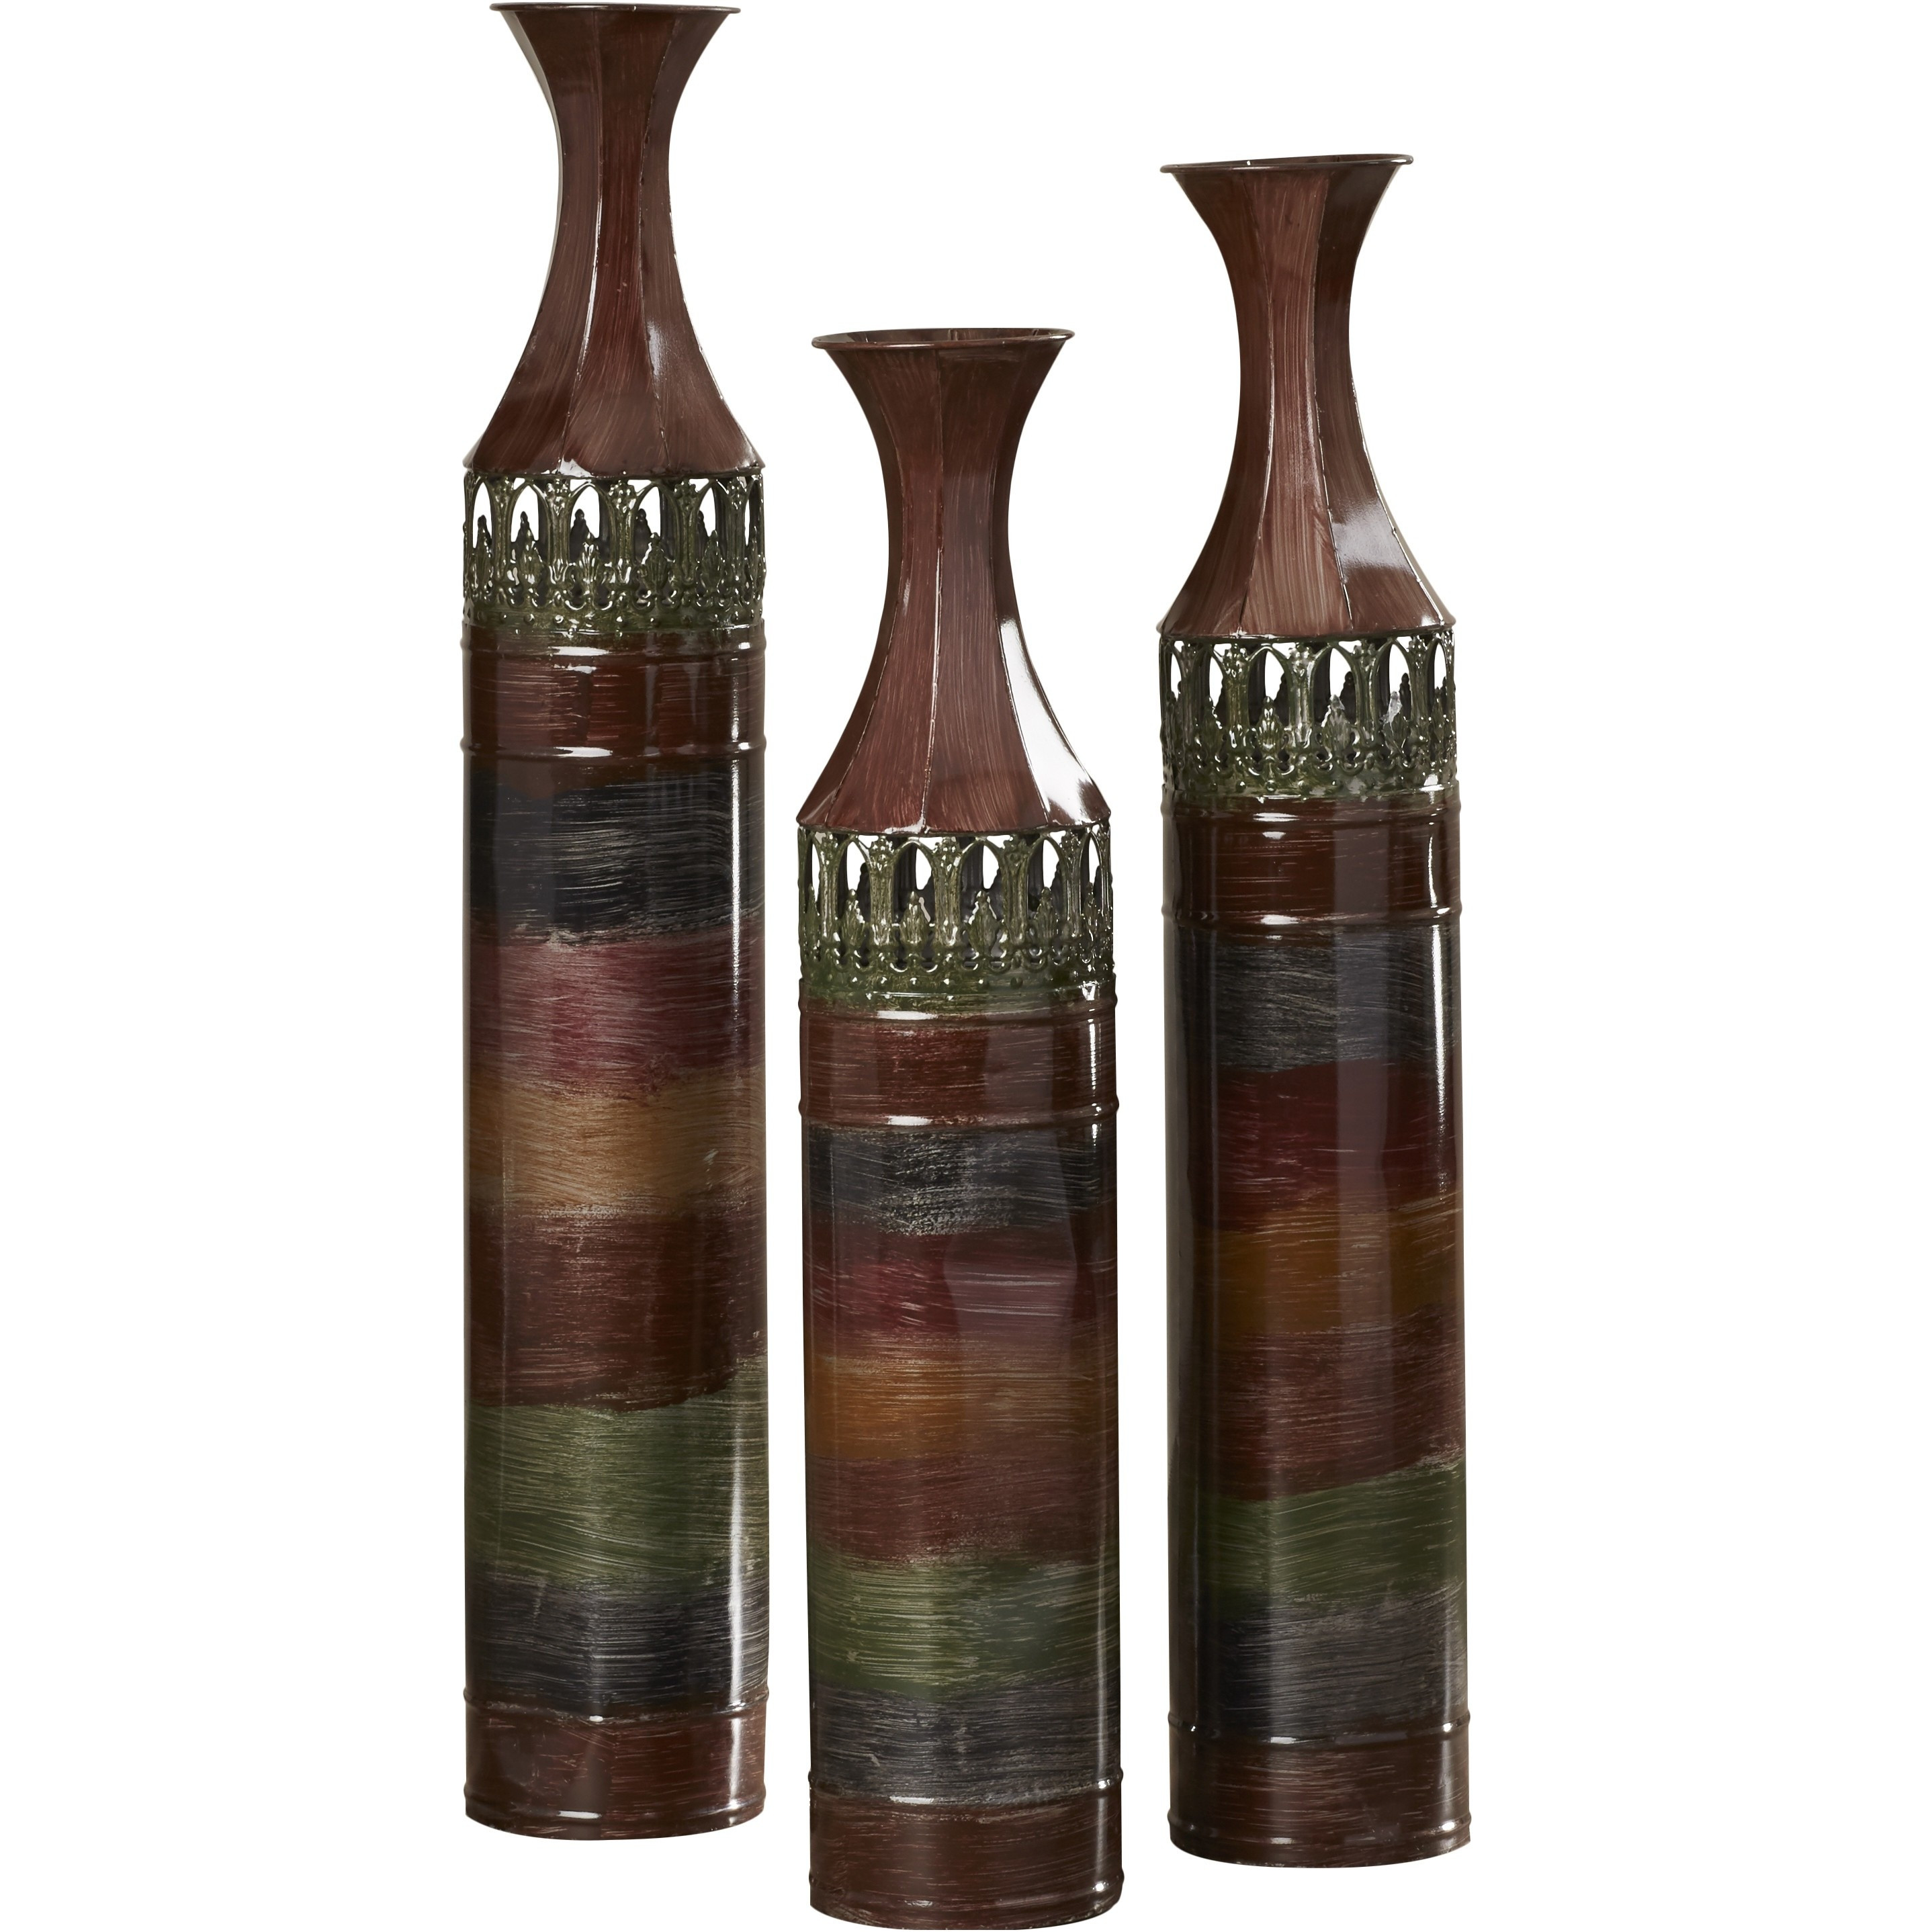 23 Nice Tall Wooden Vases 2024 free download tall wooden vases of awesome glass floor vases home design tall decorative floor vases throughout awesome glass floor vases home design tall decorative floor vases lovely vases floor vase